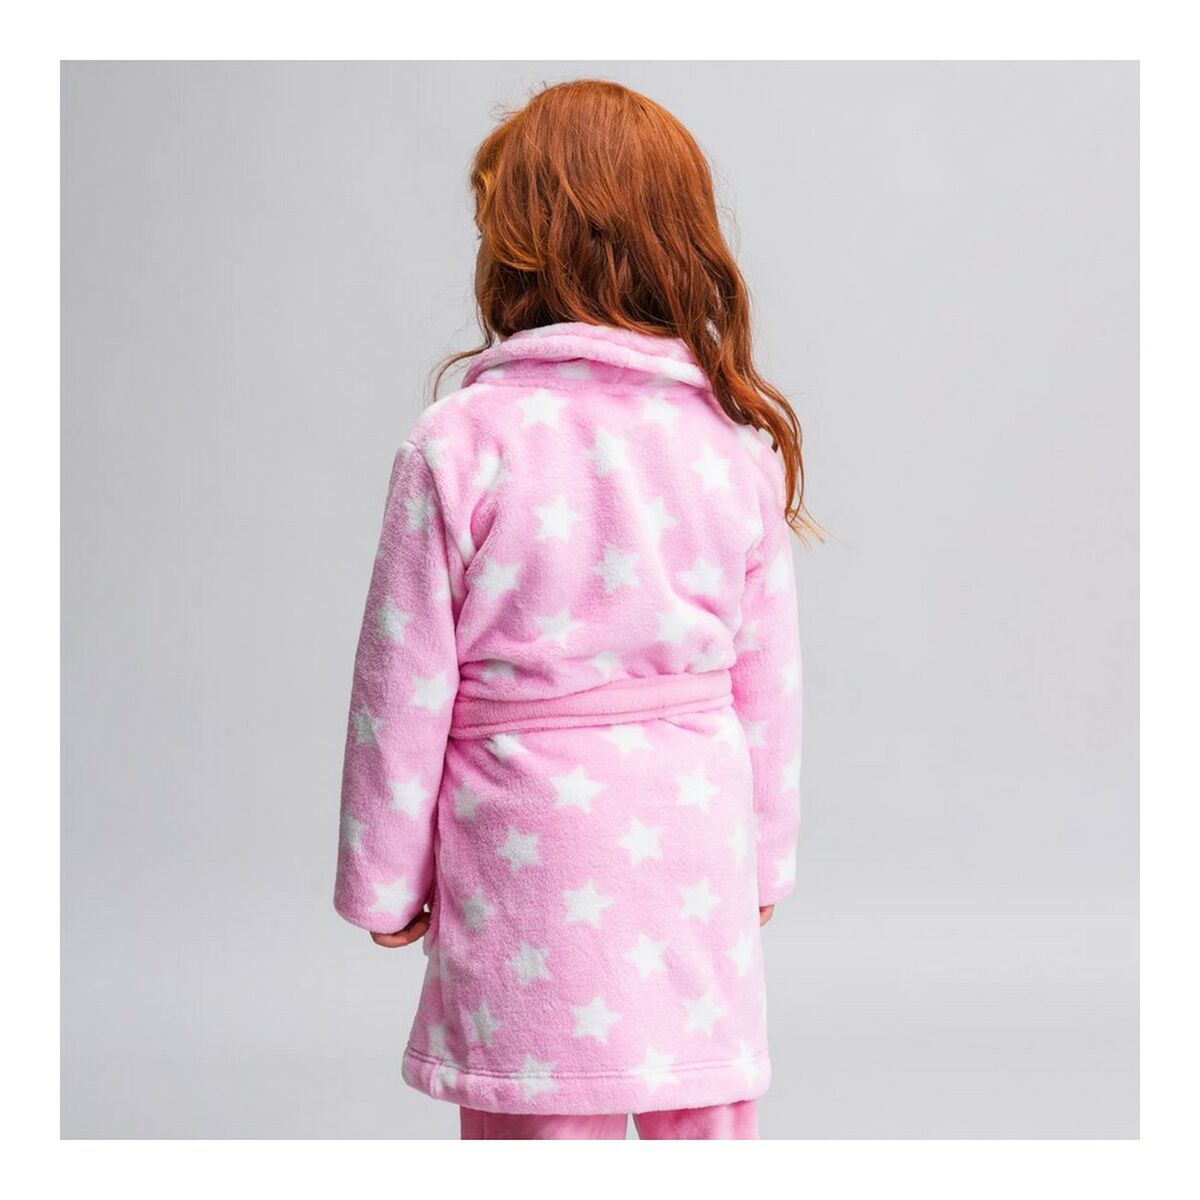 Buy Lovira Pink Hearts Print Kids Bath Robe Online at Low Prices in India -  Amazon.in